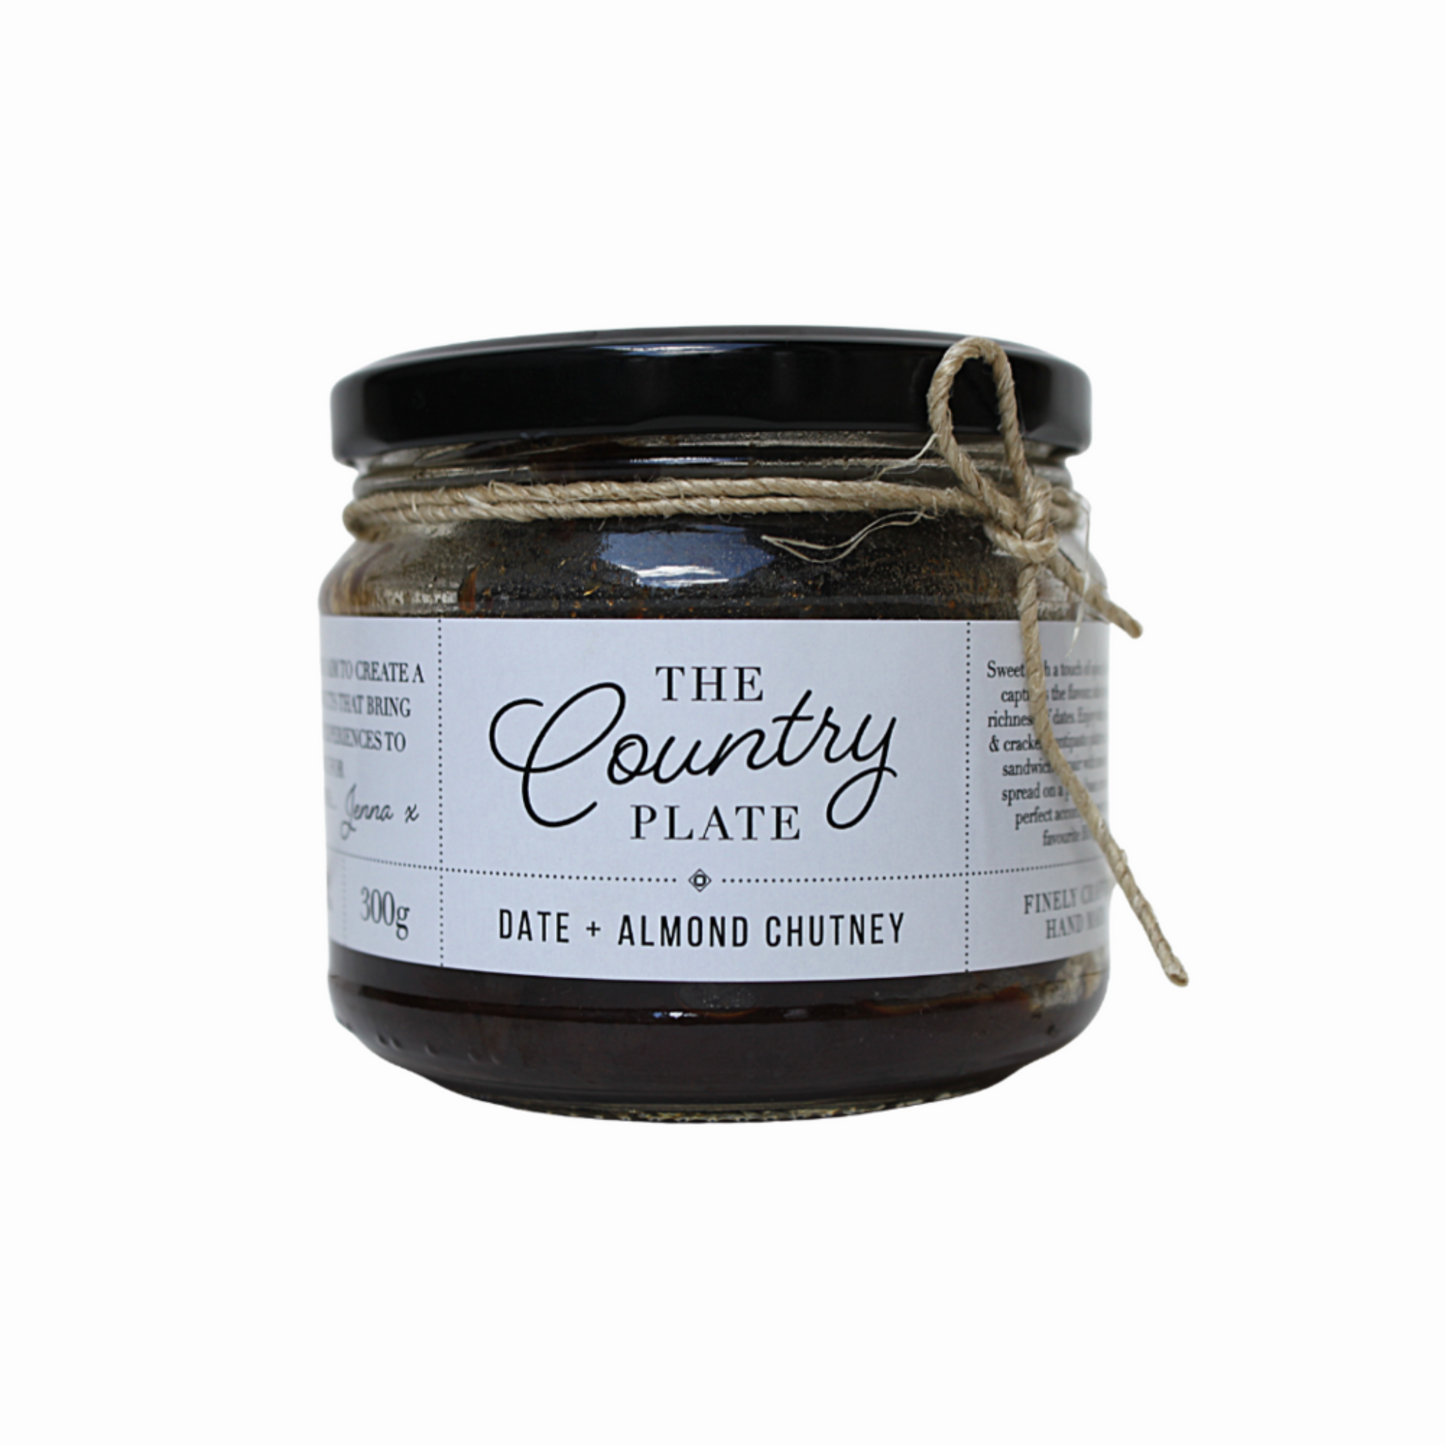 The Country Plate - Date + Almond Chutney 300g